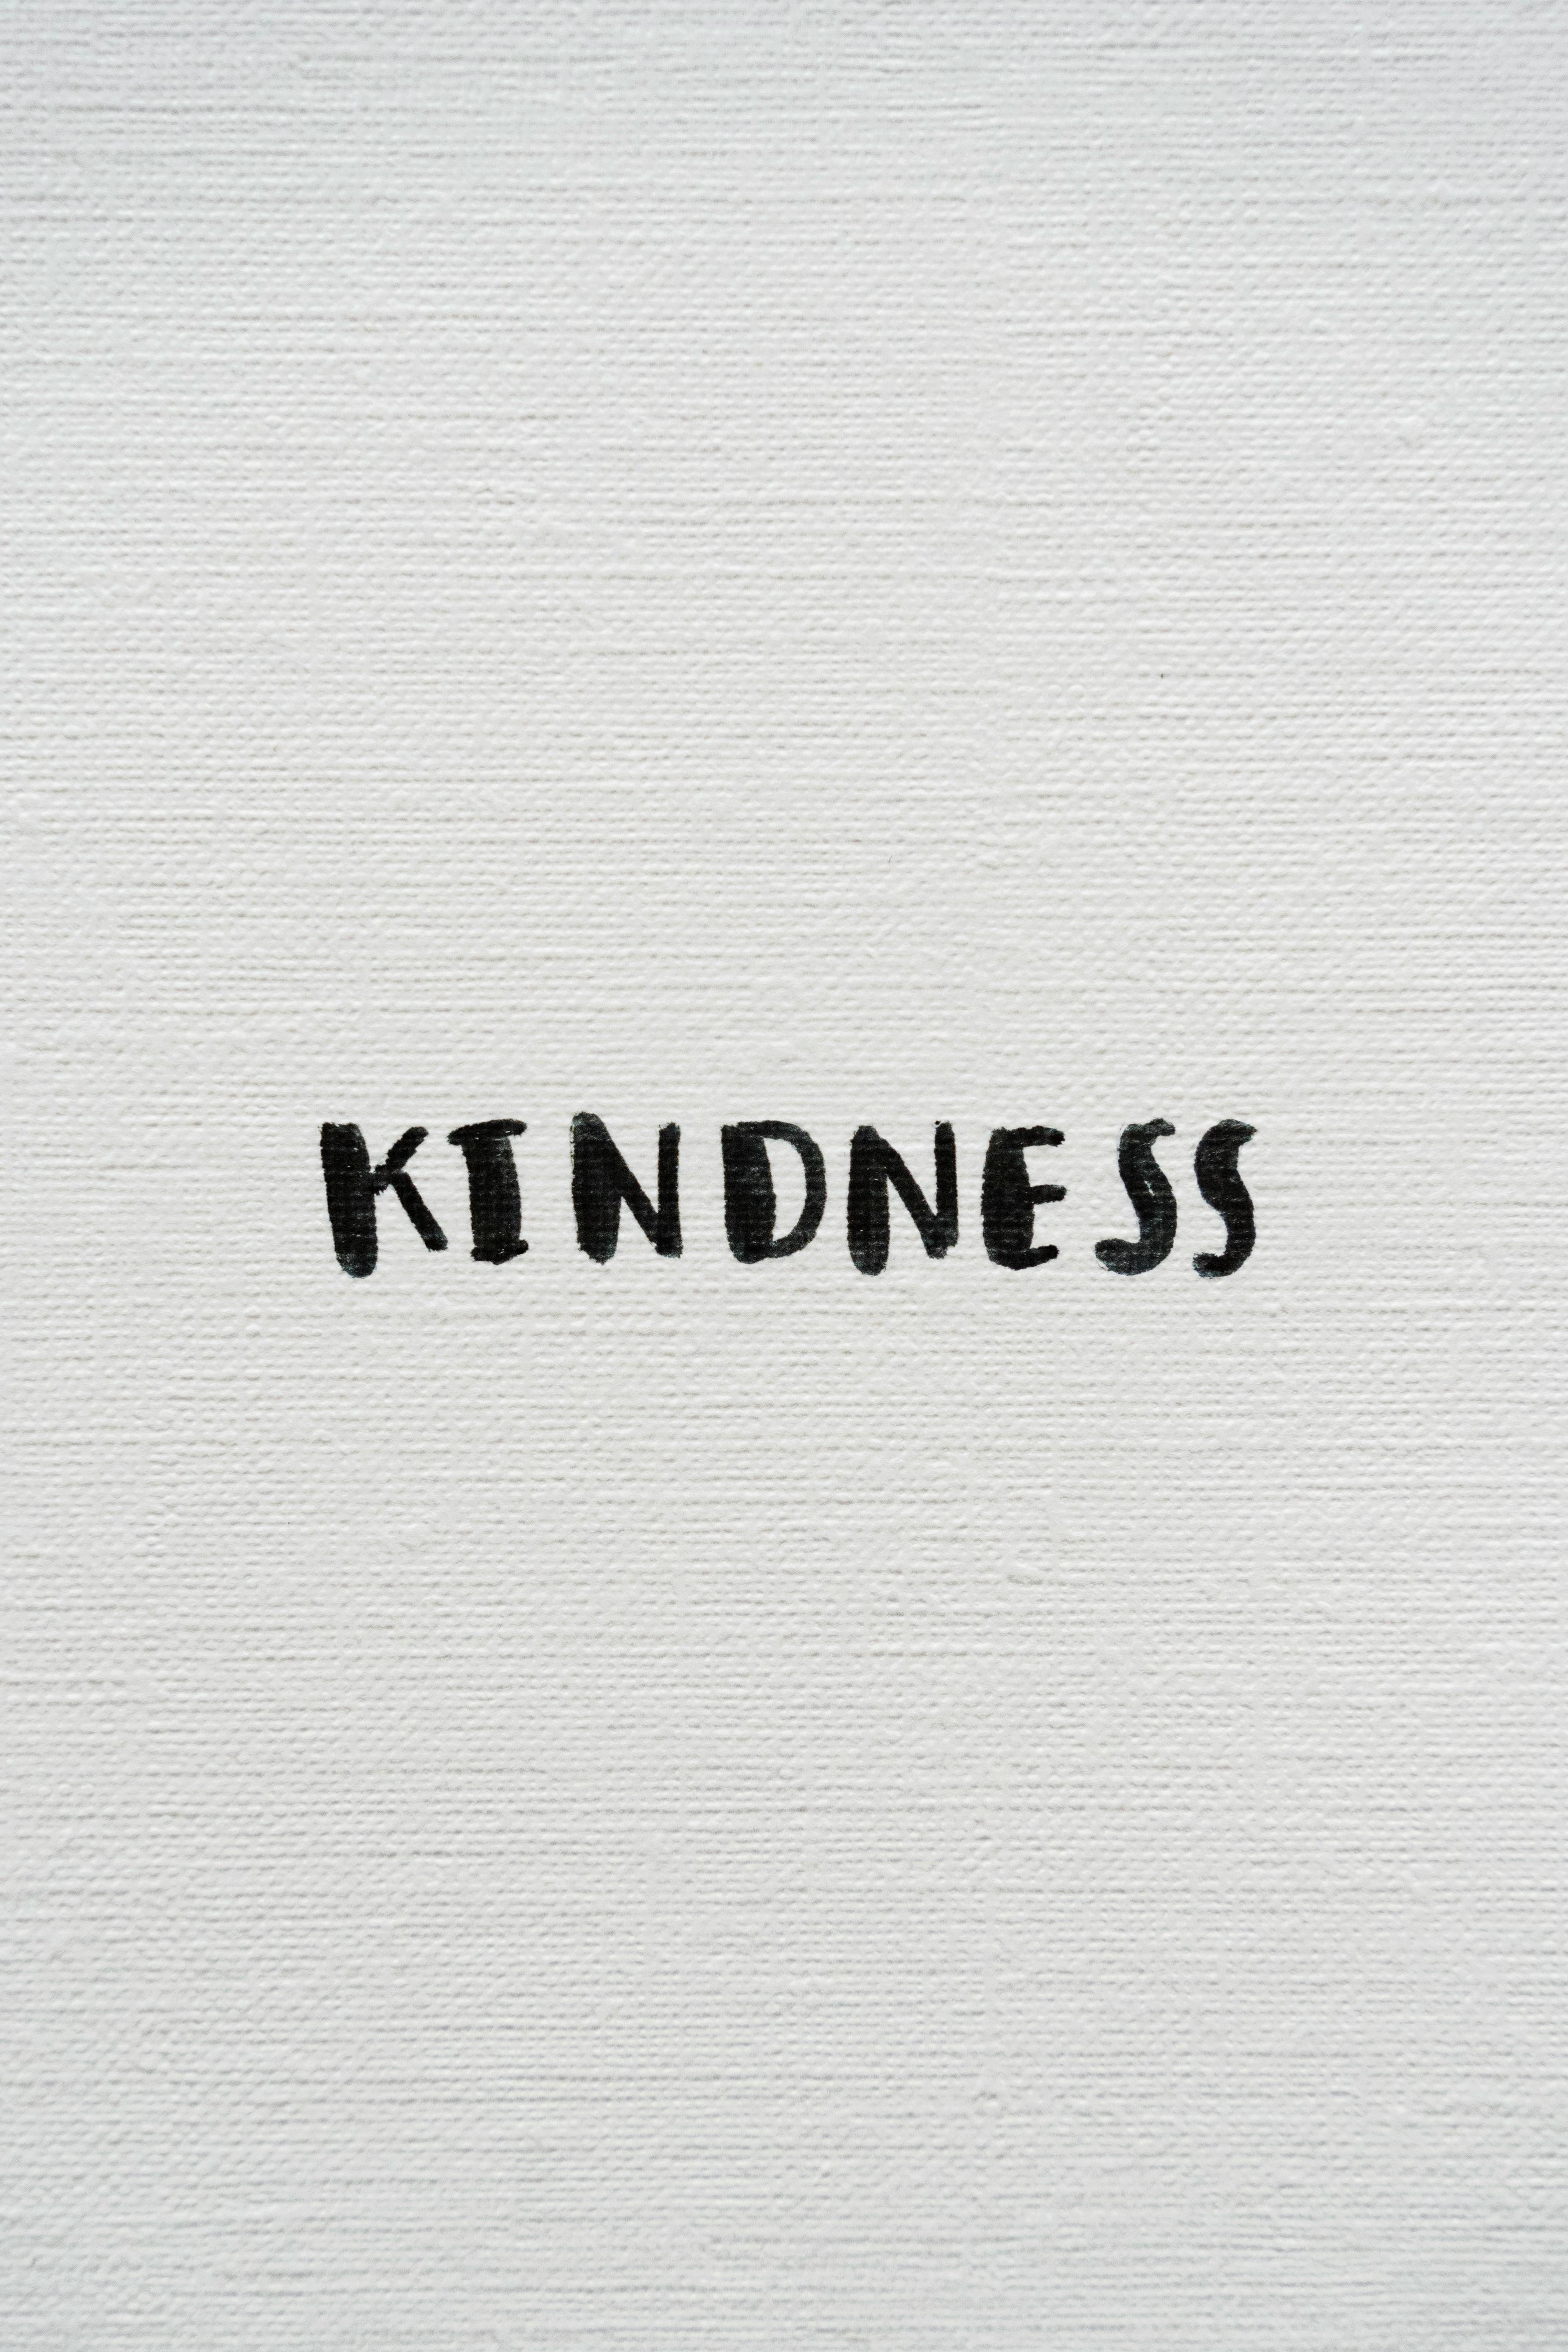 Kindness Photos Download The BEST Free Kindness Stock Photos  HD Images